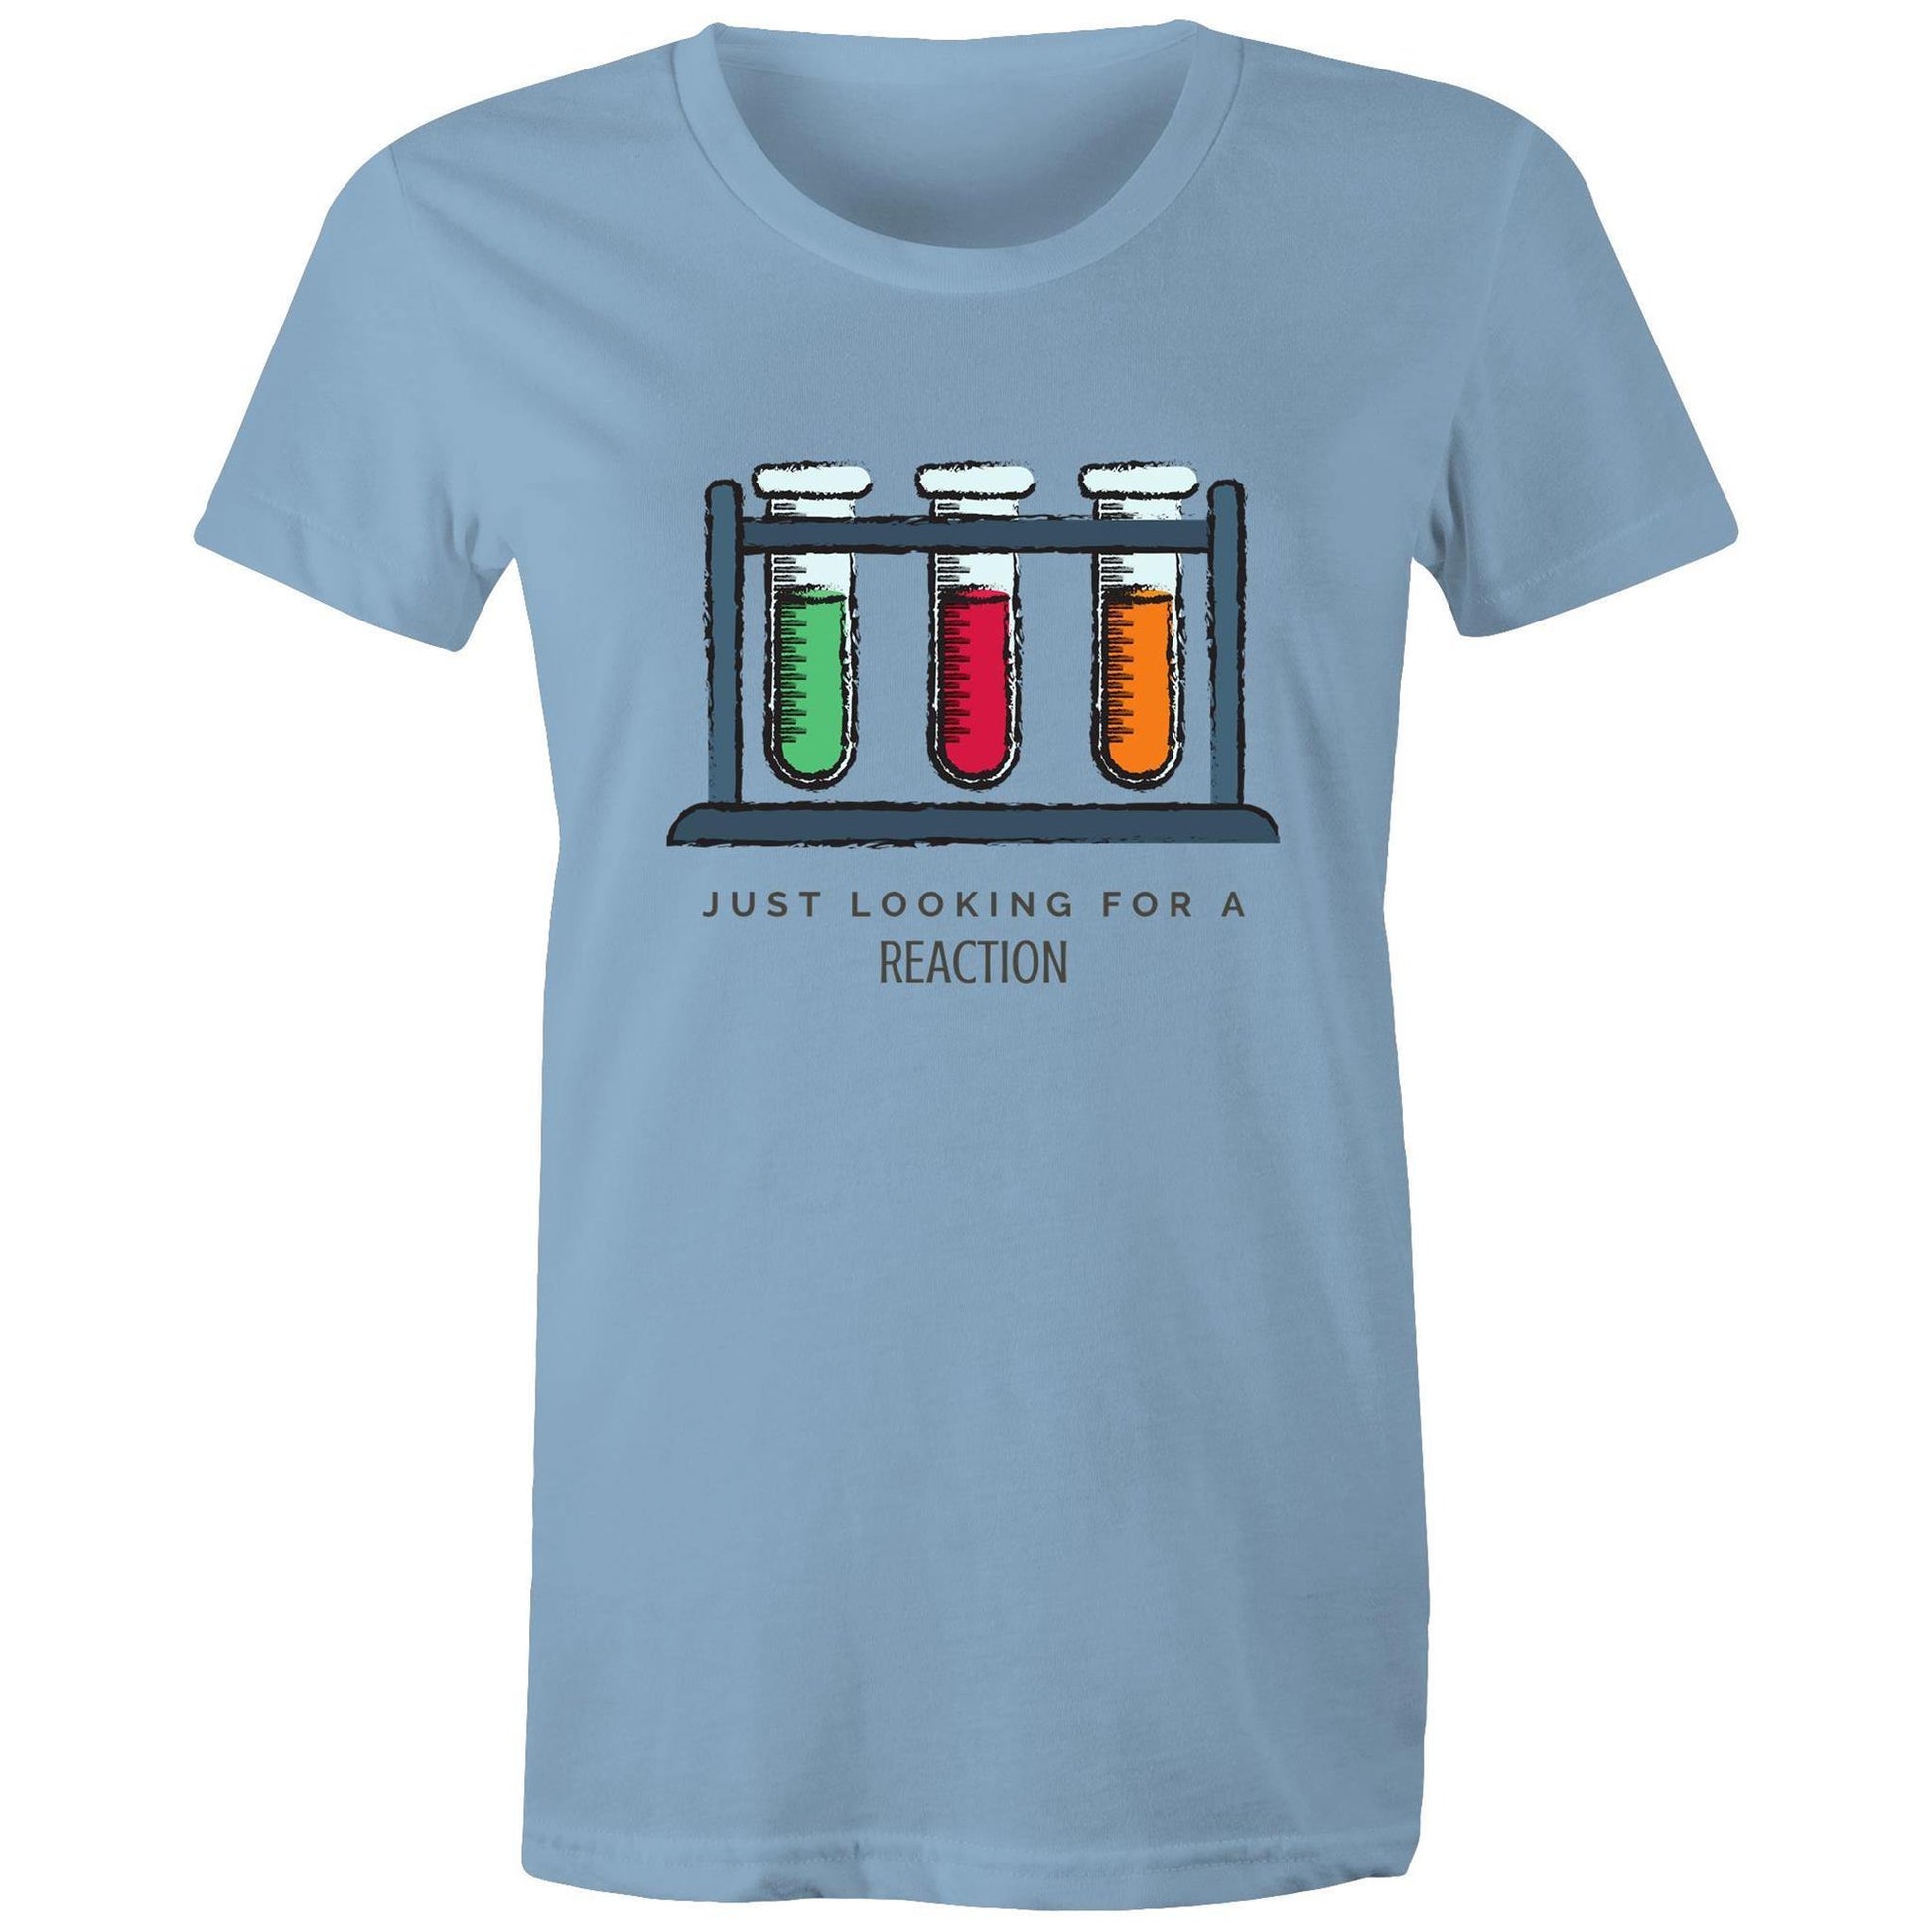 Test Tube, Just Looking For A Reaction - Women's T-shirt Carolina Blue Womens T-shirt Science Womens